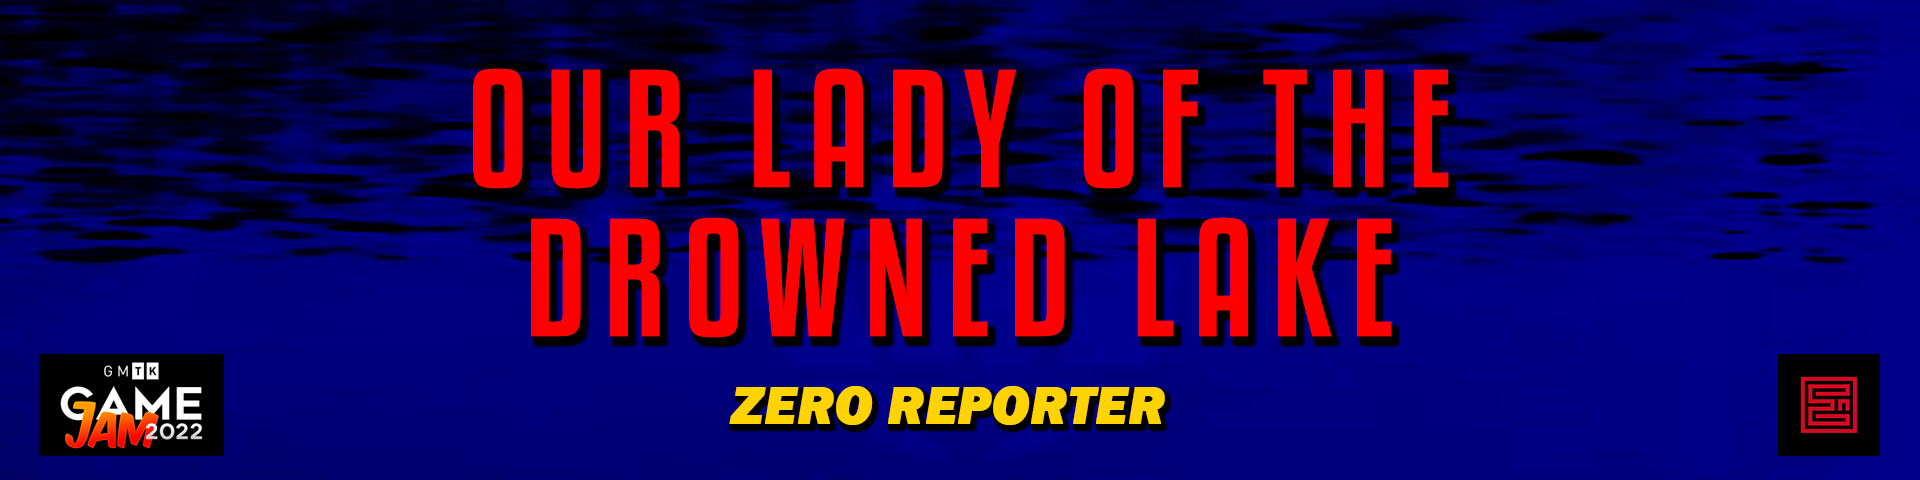 Our Lady of the Drowned Lake, Zero Reporter